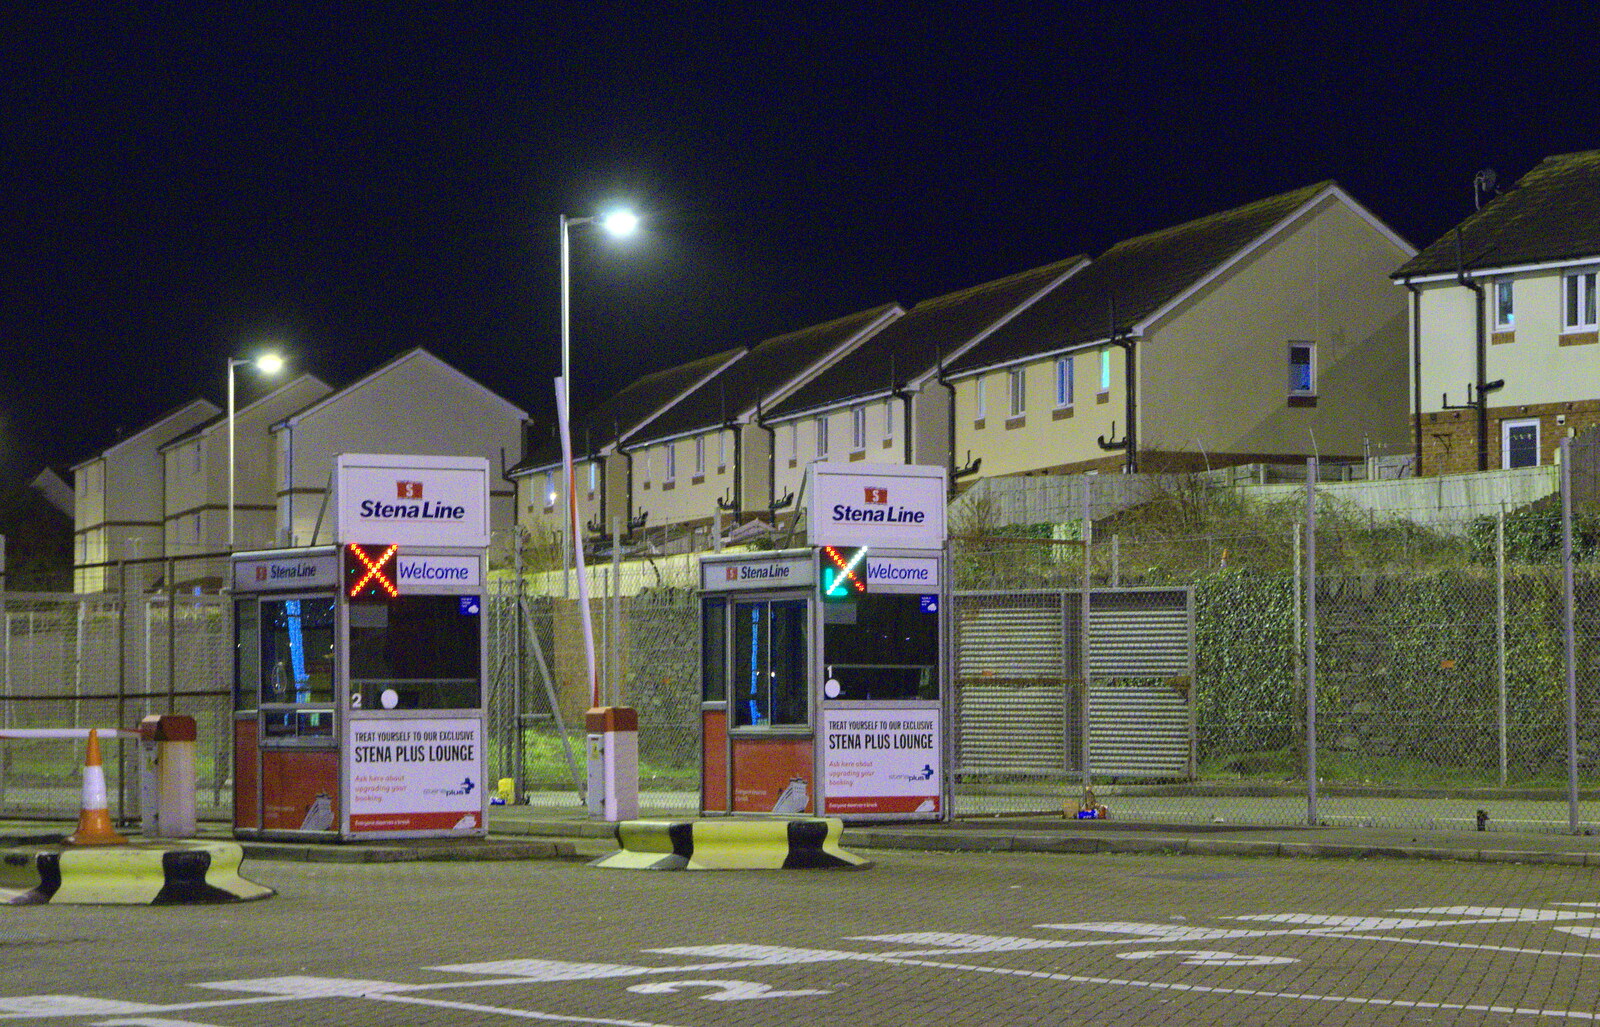 The check-in booths at Holyhead ferry terminal from Conwy, Holyhead and the Ferry to Ireland - 21st December 2015